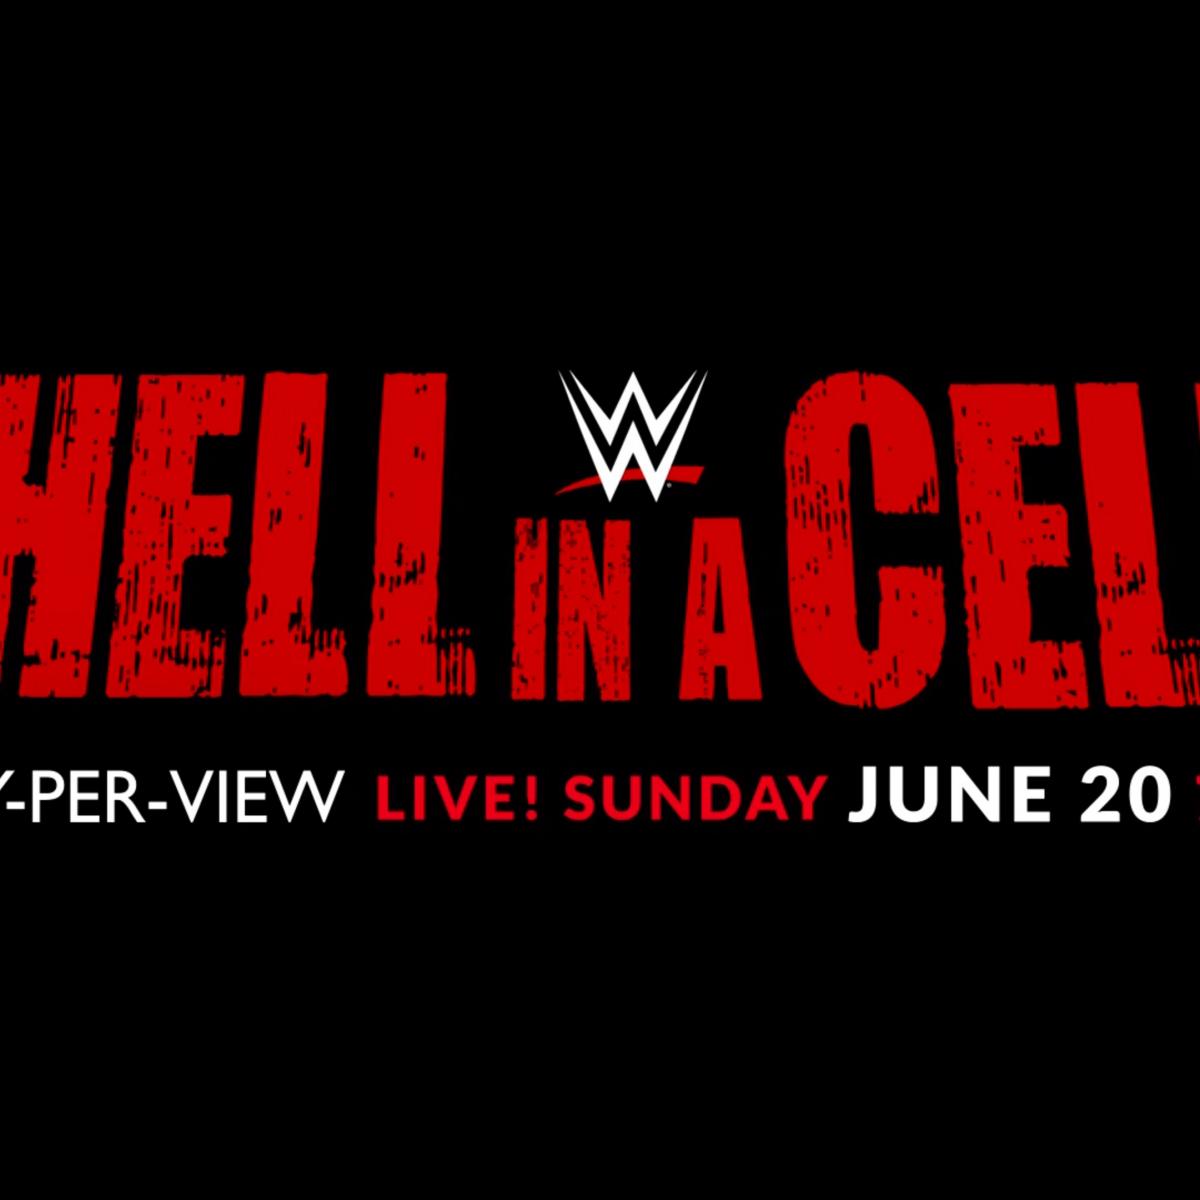 Ranking the Most productive Match Ideas to Clutch Feature Inner WWE Hell in a Cell